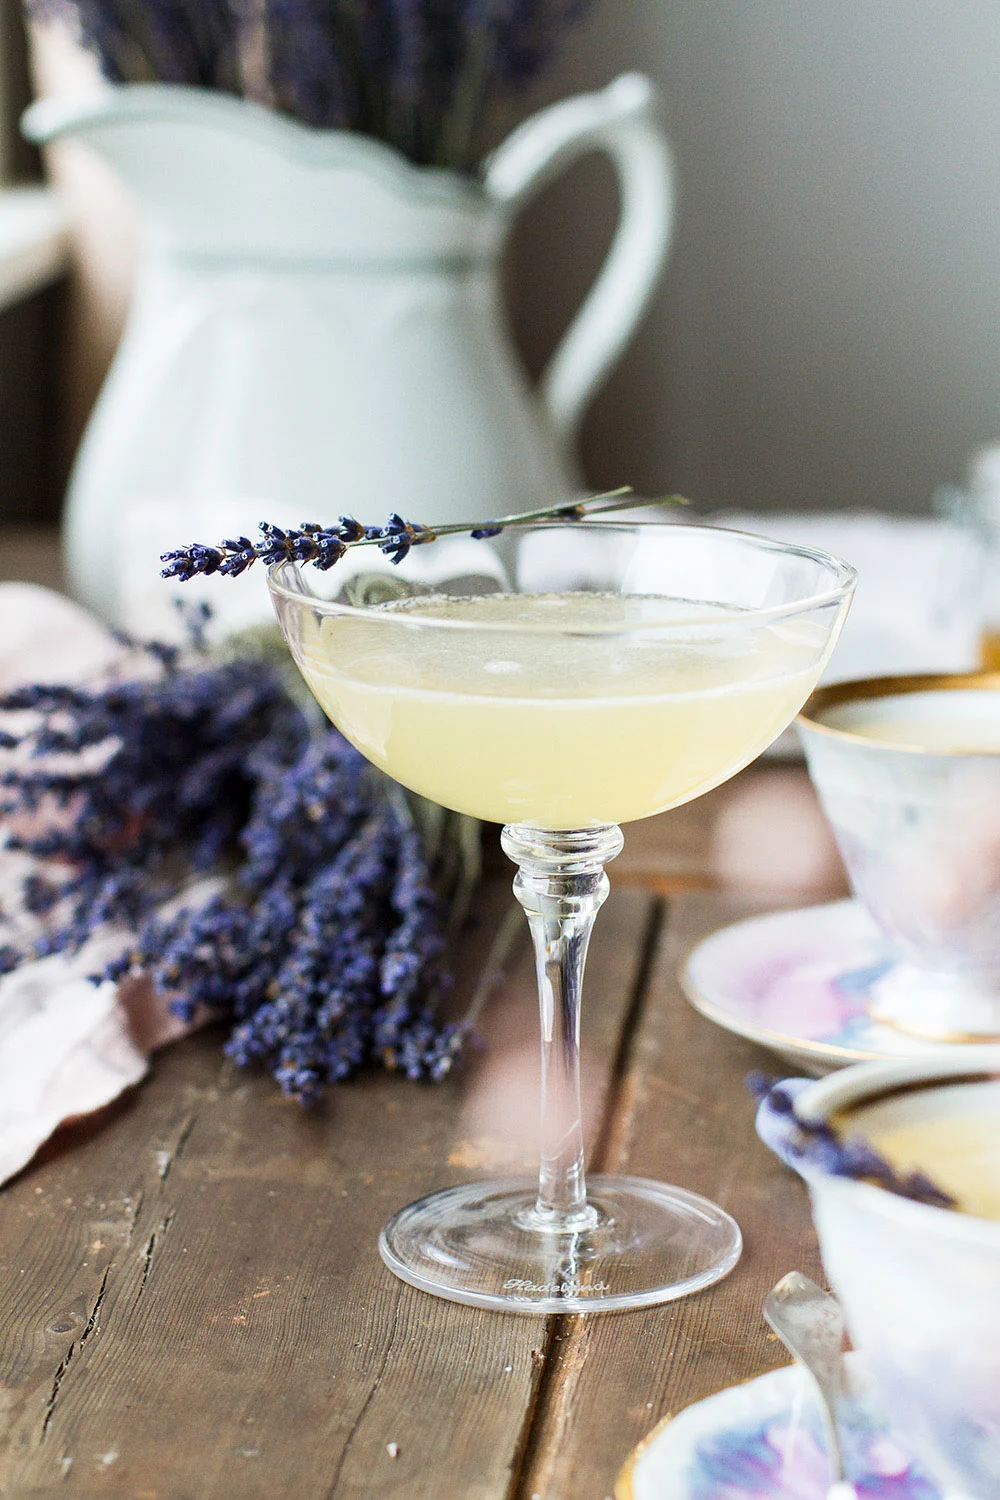 Coupé glass with yellow cocktail, garnished with dried lavender.